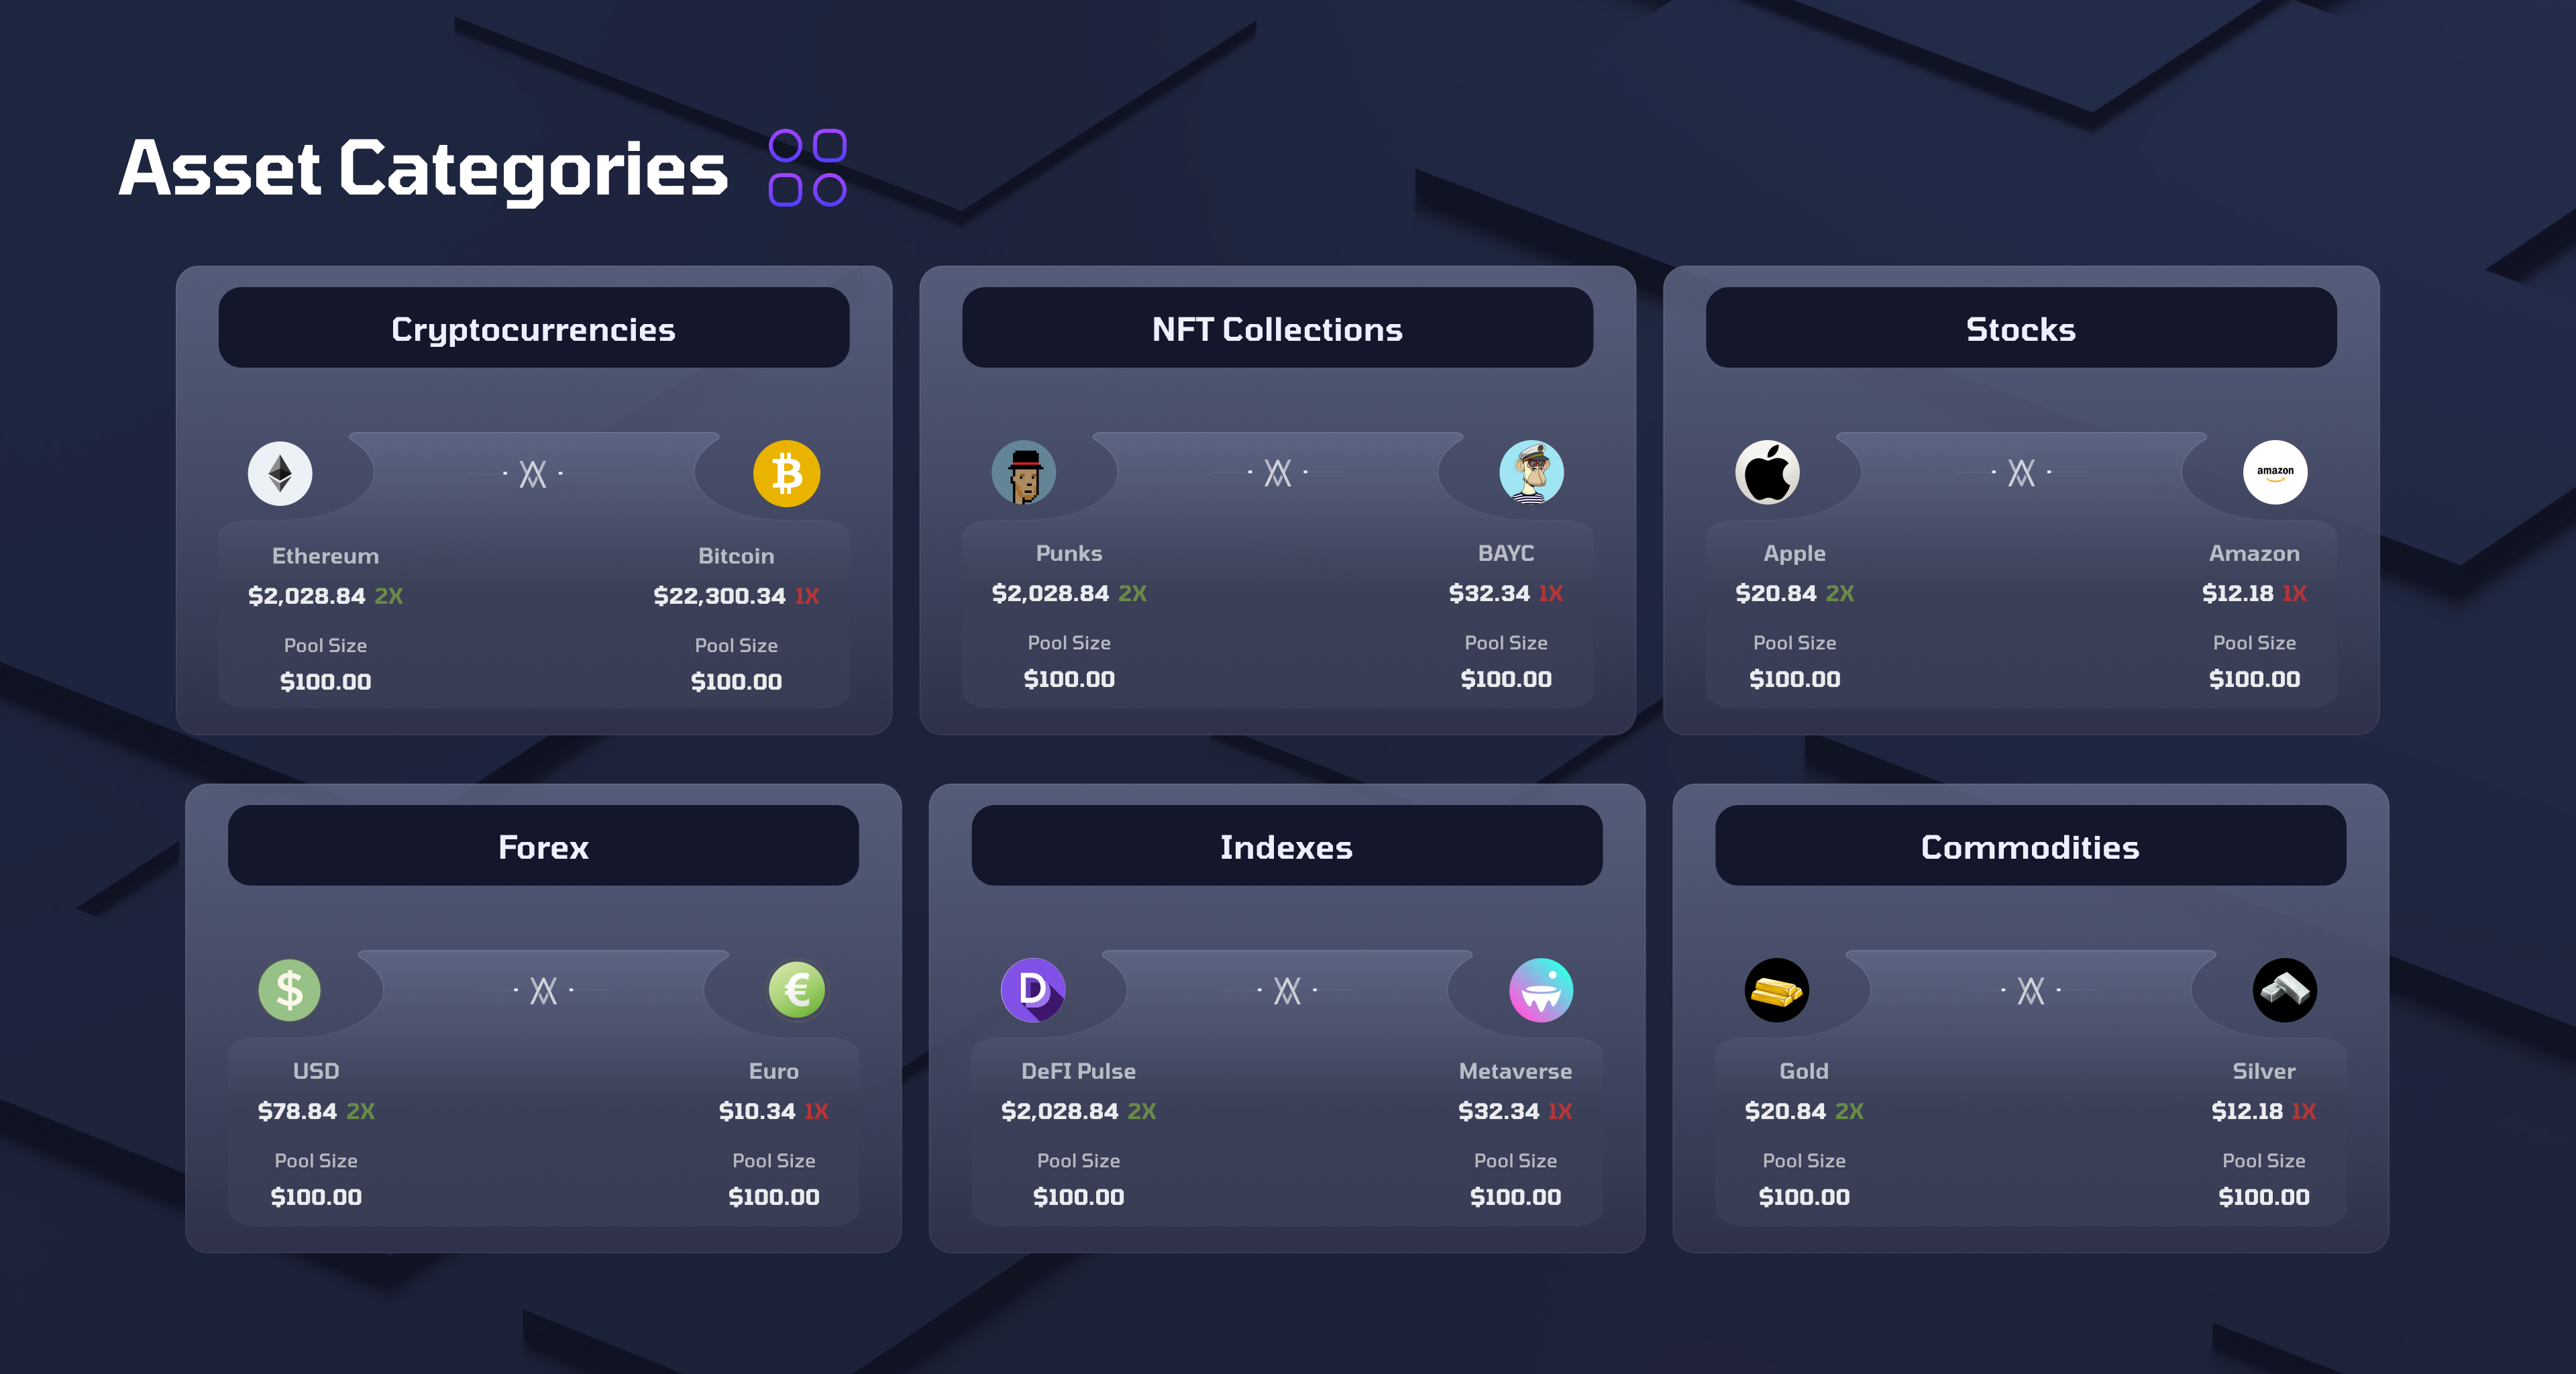 Users can speculate across all asset categories in the P2P market.